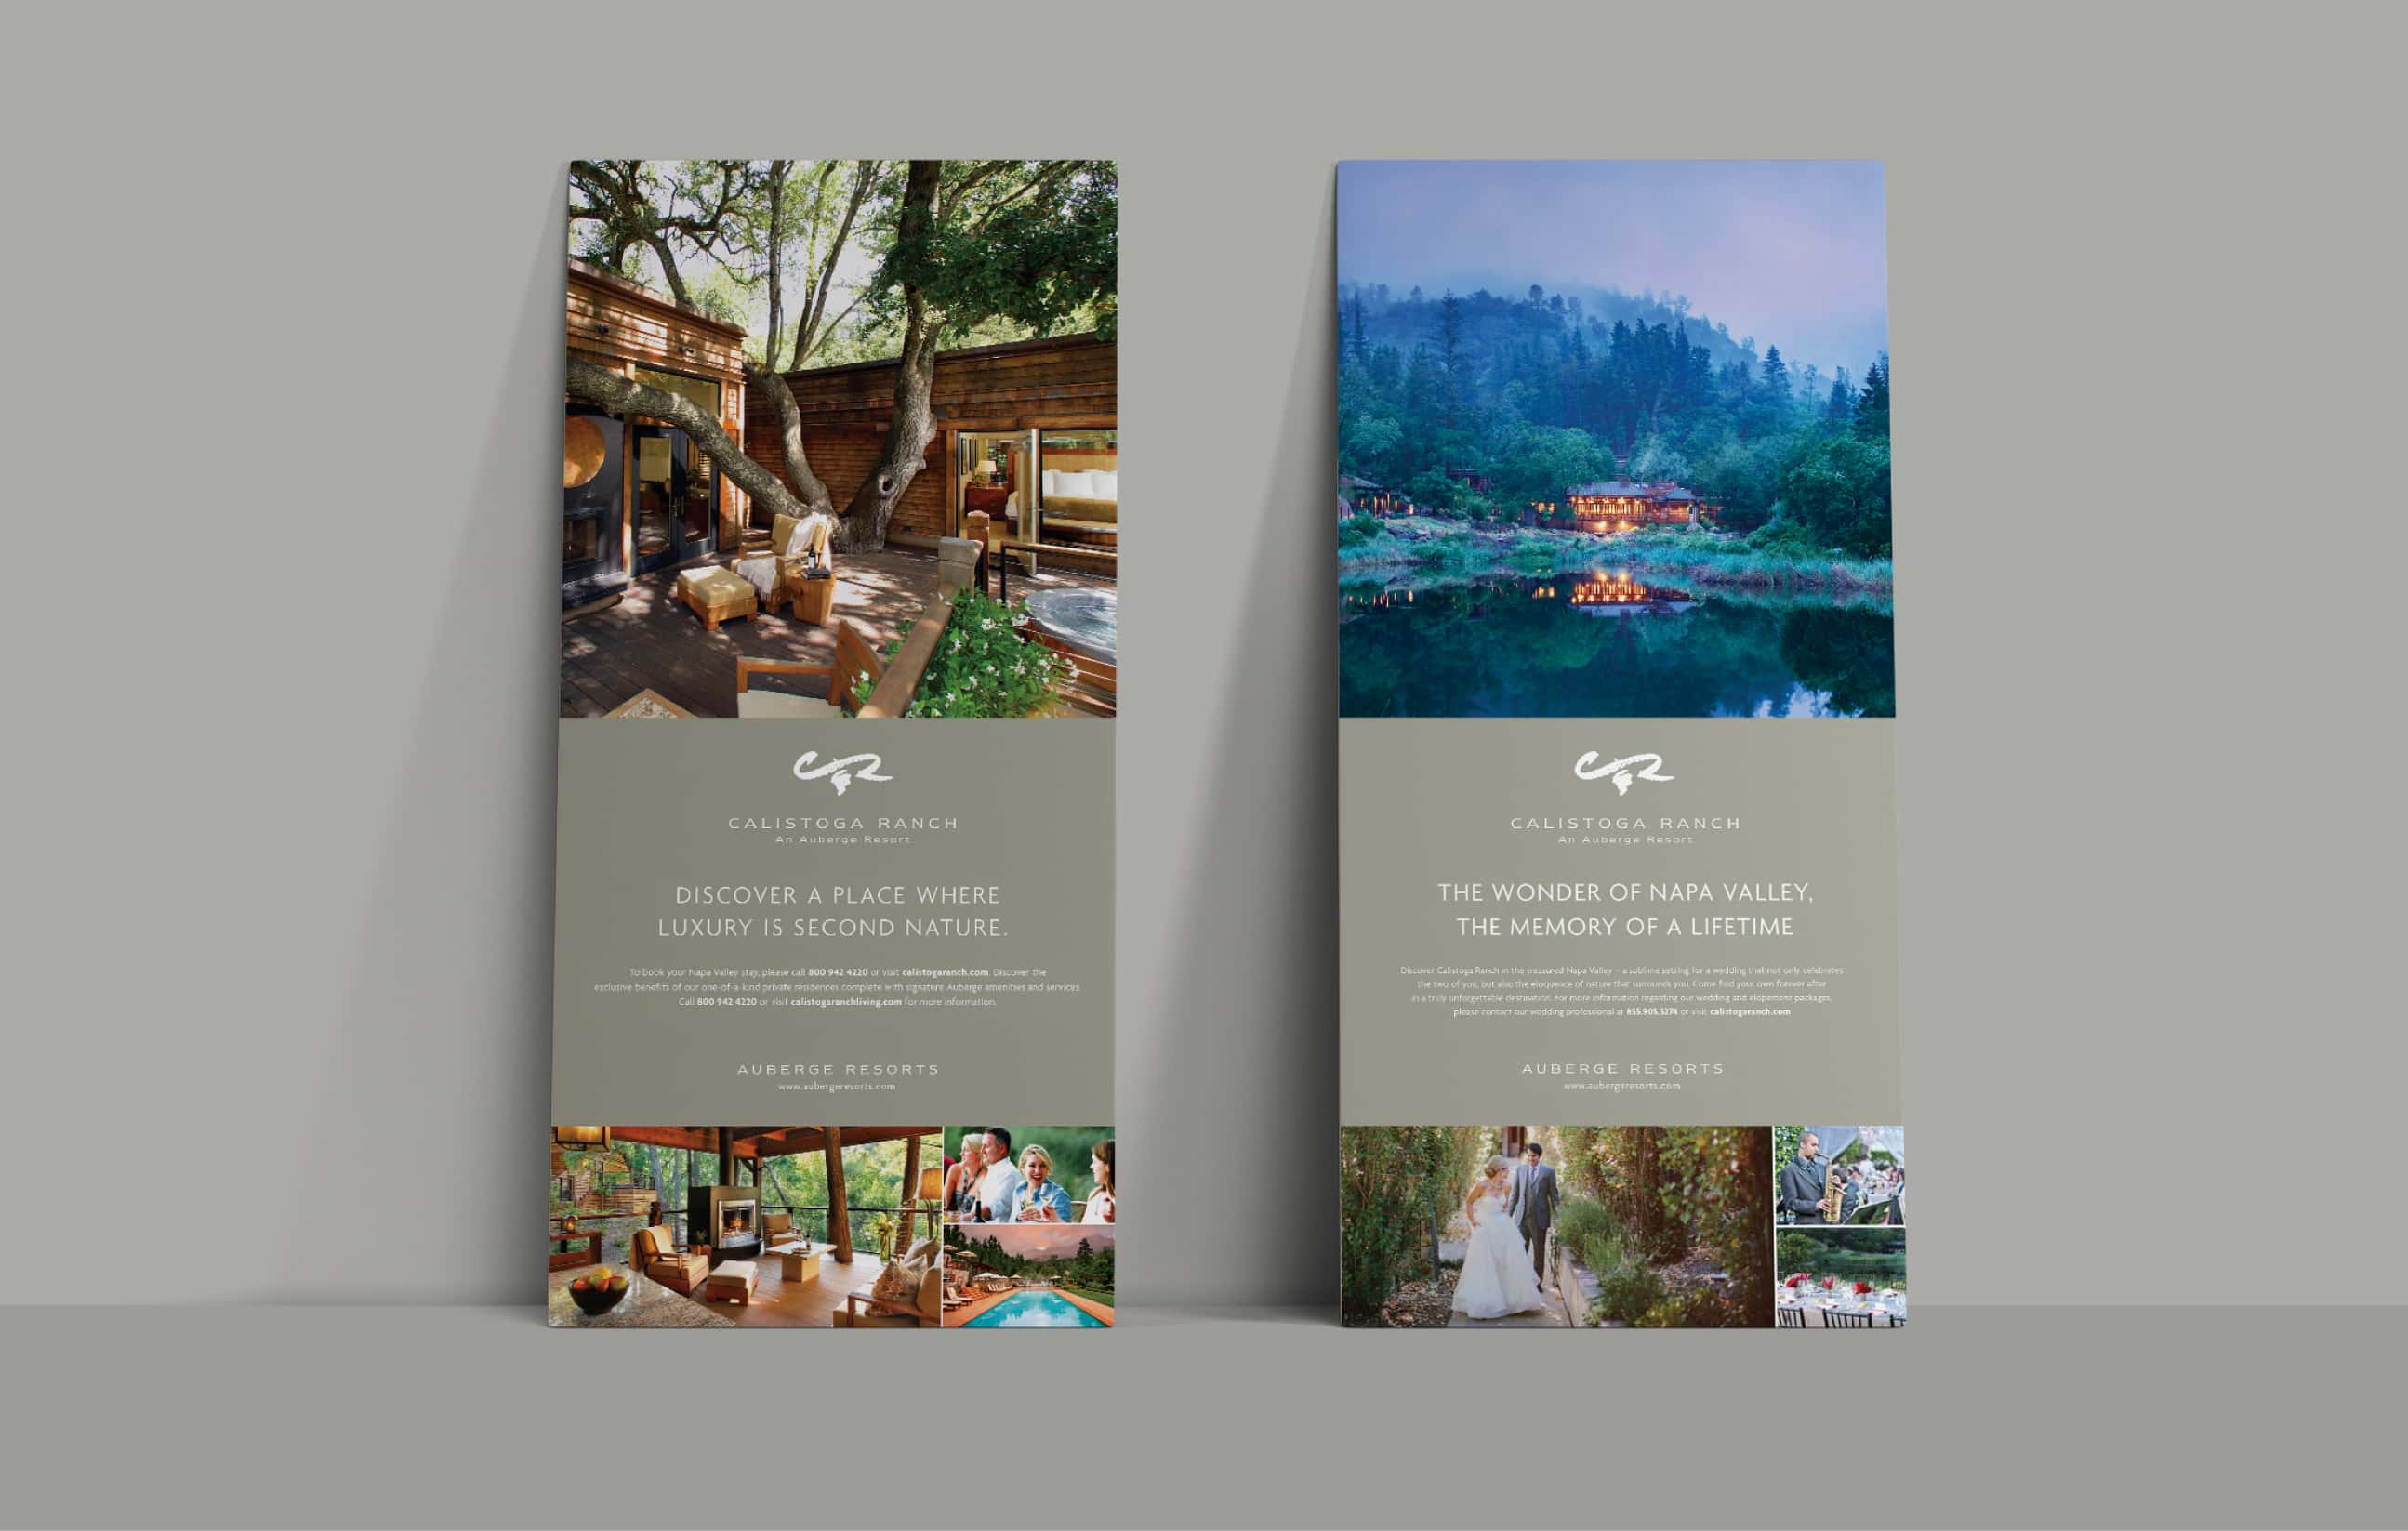 Two vertical banners displayed side by side. The left banner features a serene outdoor spa setting with the text 'Discover a place where luxury is second nature', and the right banner showcases a twilight scene over a water body with floating lights, captioned 'The wonder of Napa Valley, the memory of a lifetime'. Both have the 'Calistoga Ranch' logo and are branded as Auberge Resorts.